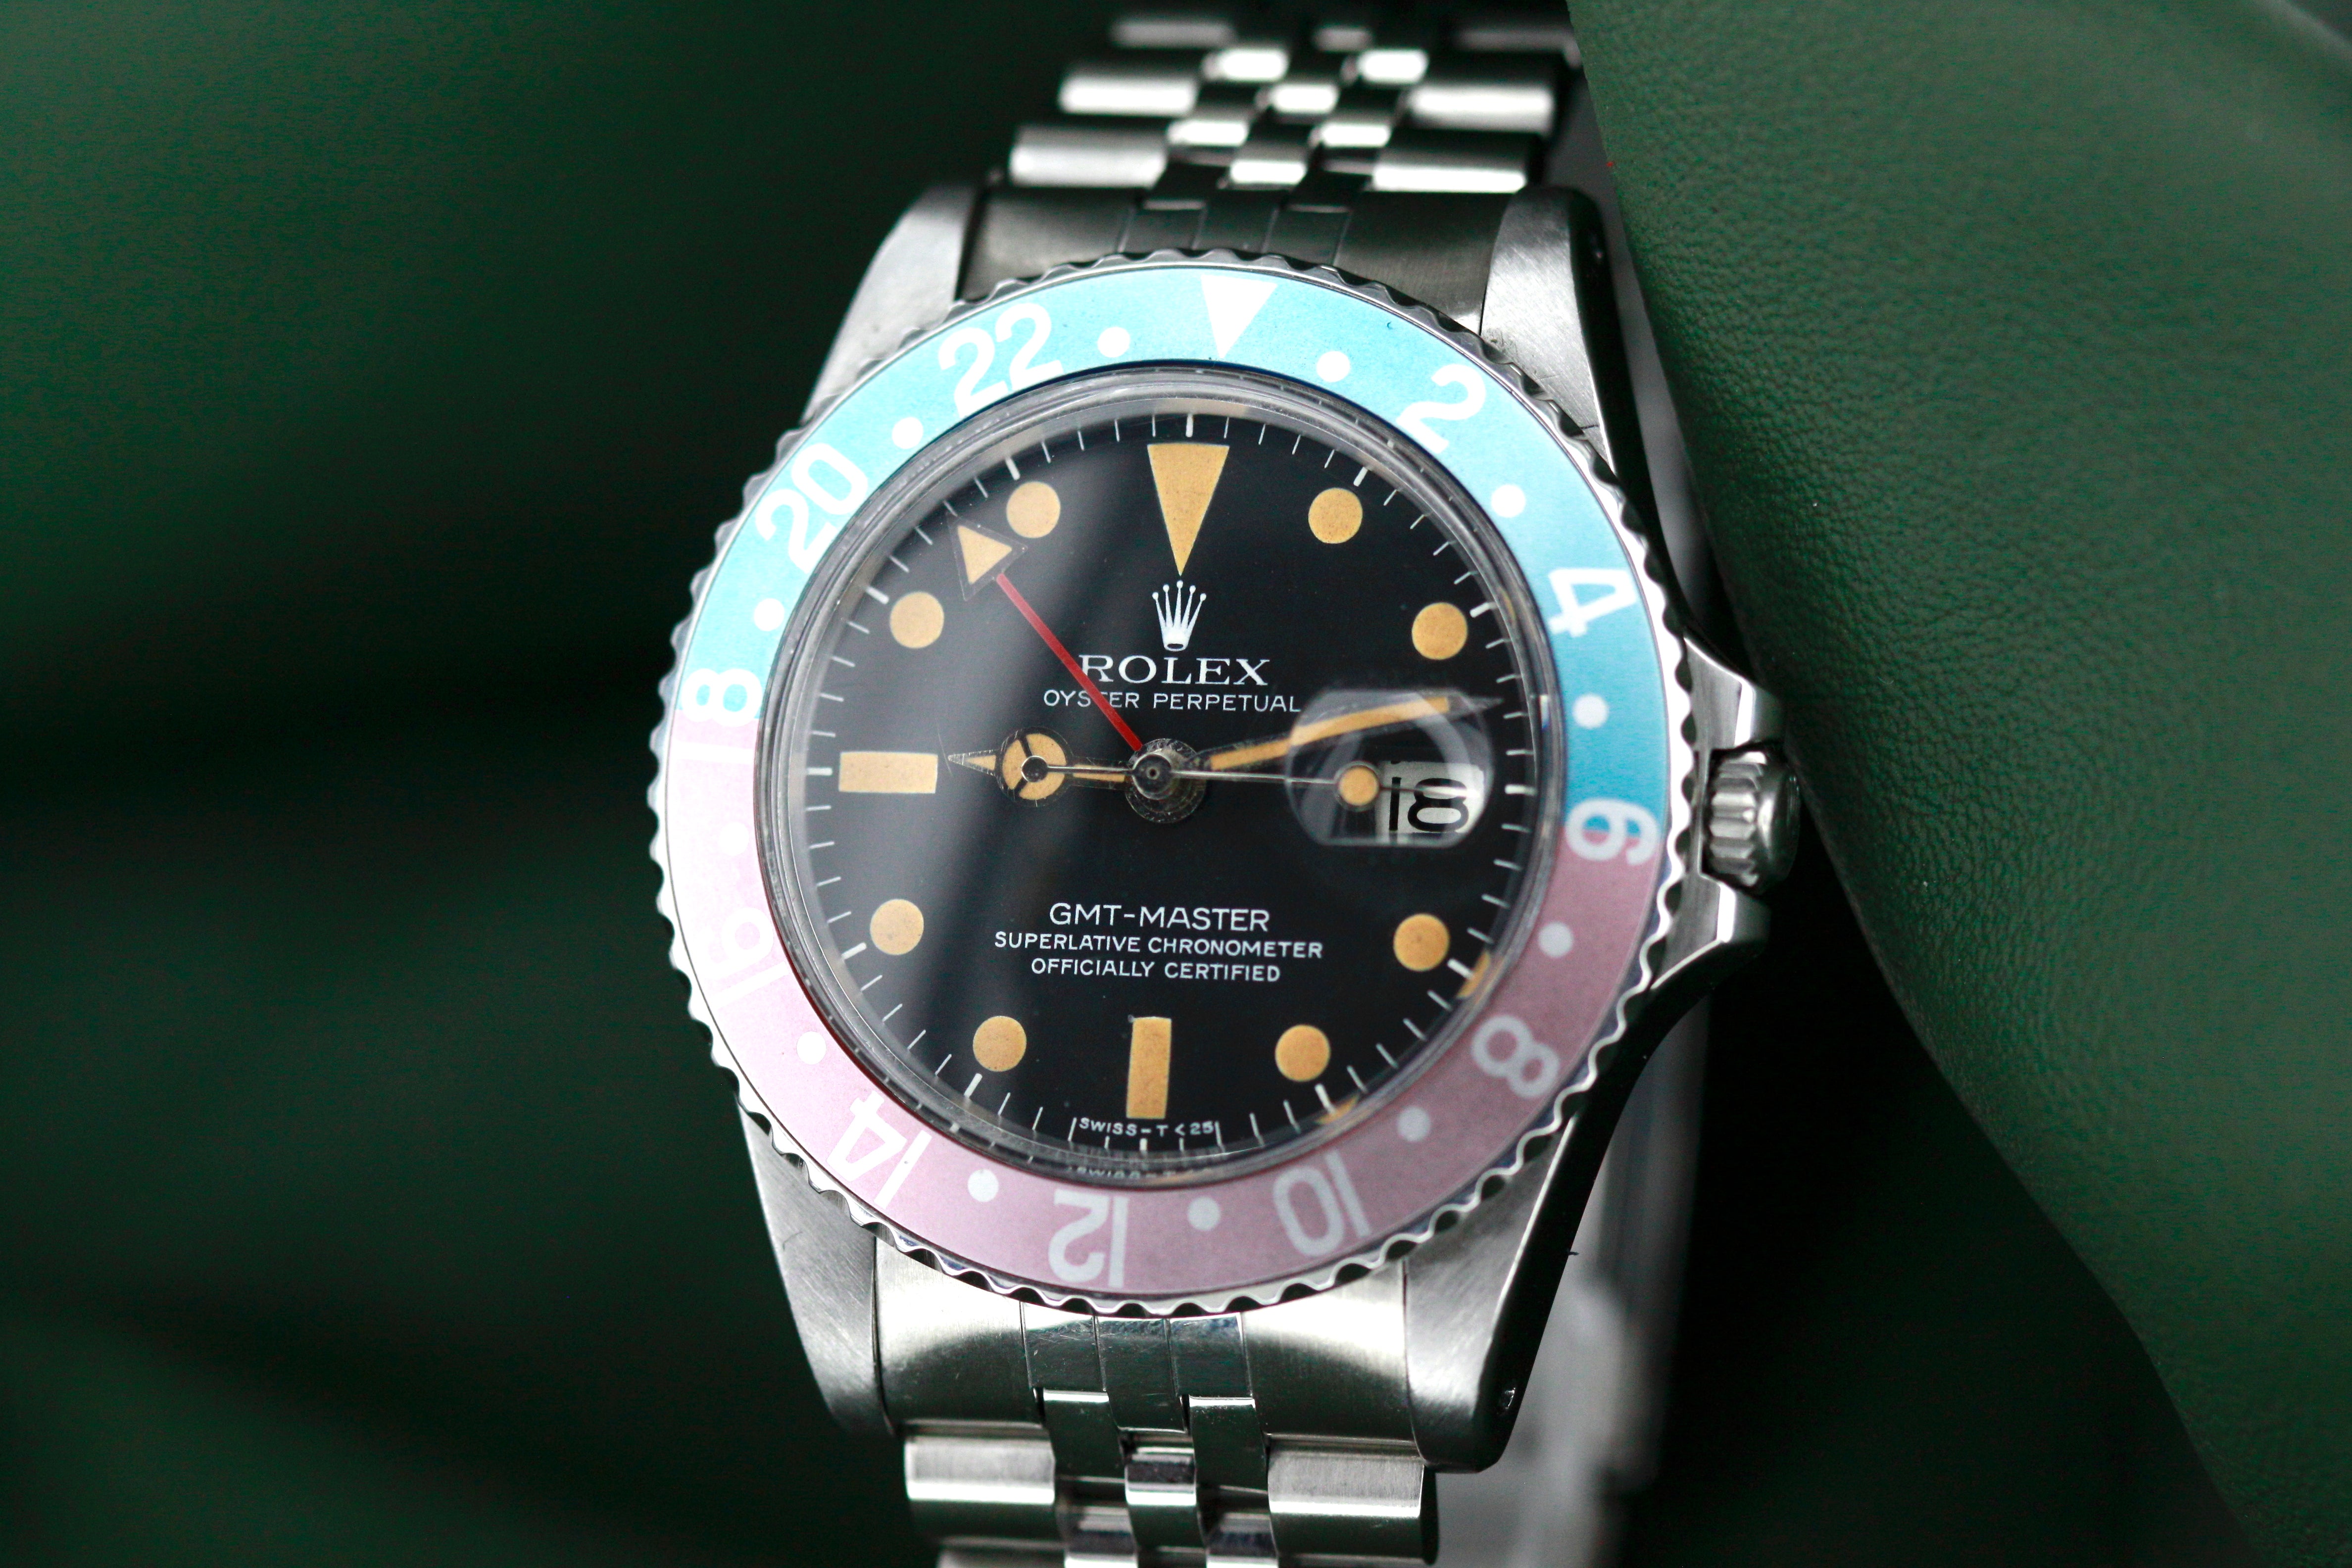 ROLEX Gmt master REF 1675 FROM 1976-77 mk5 dial